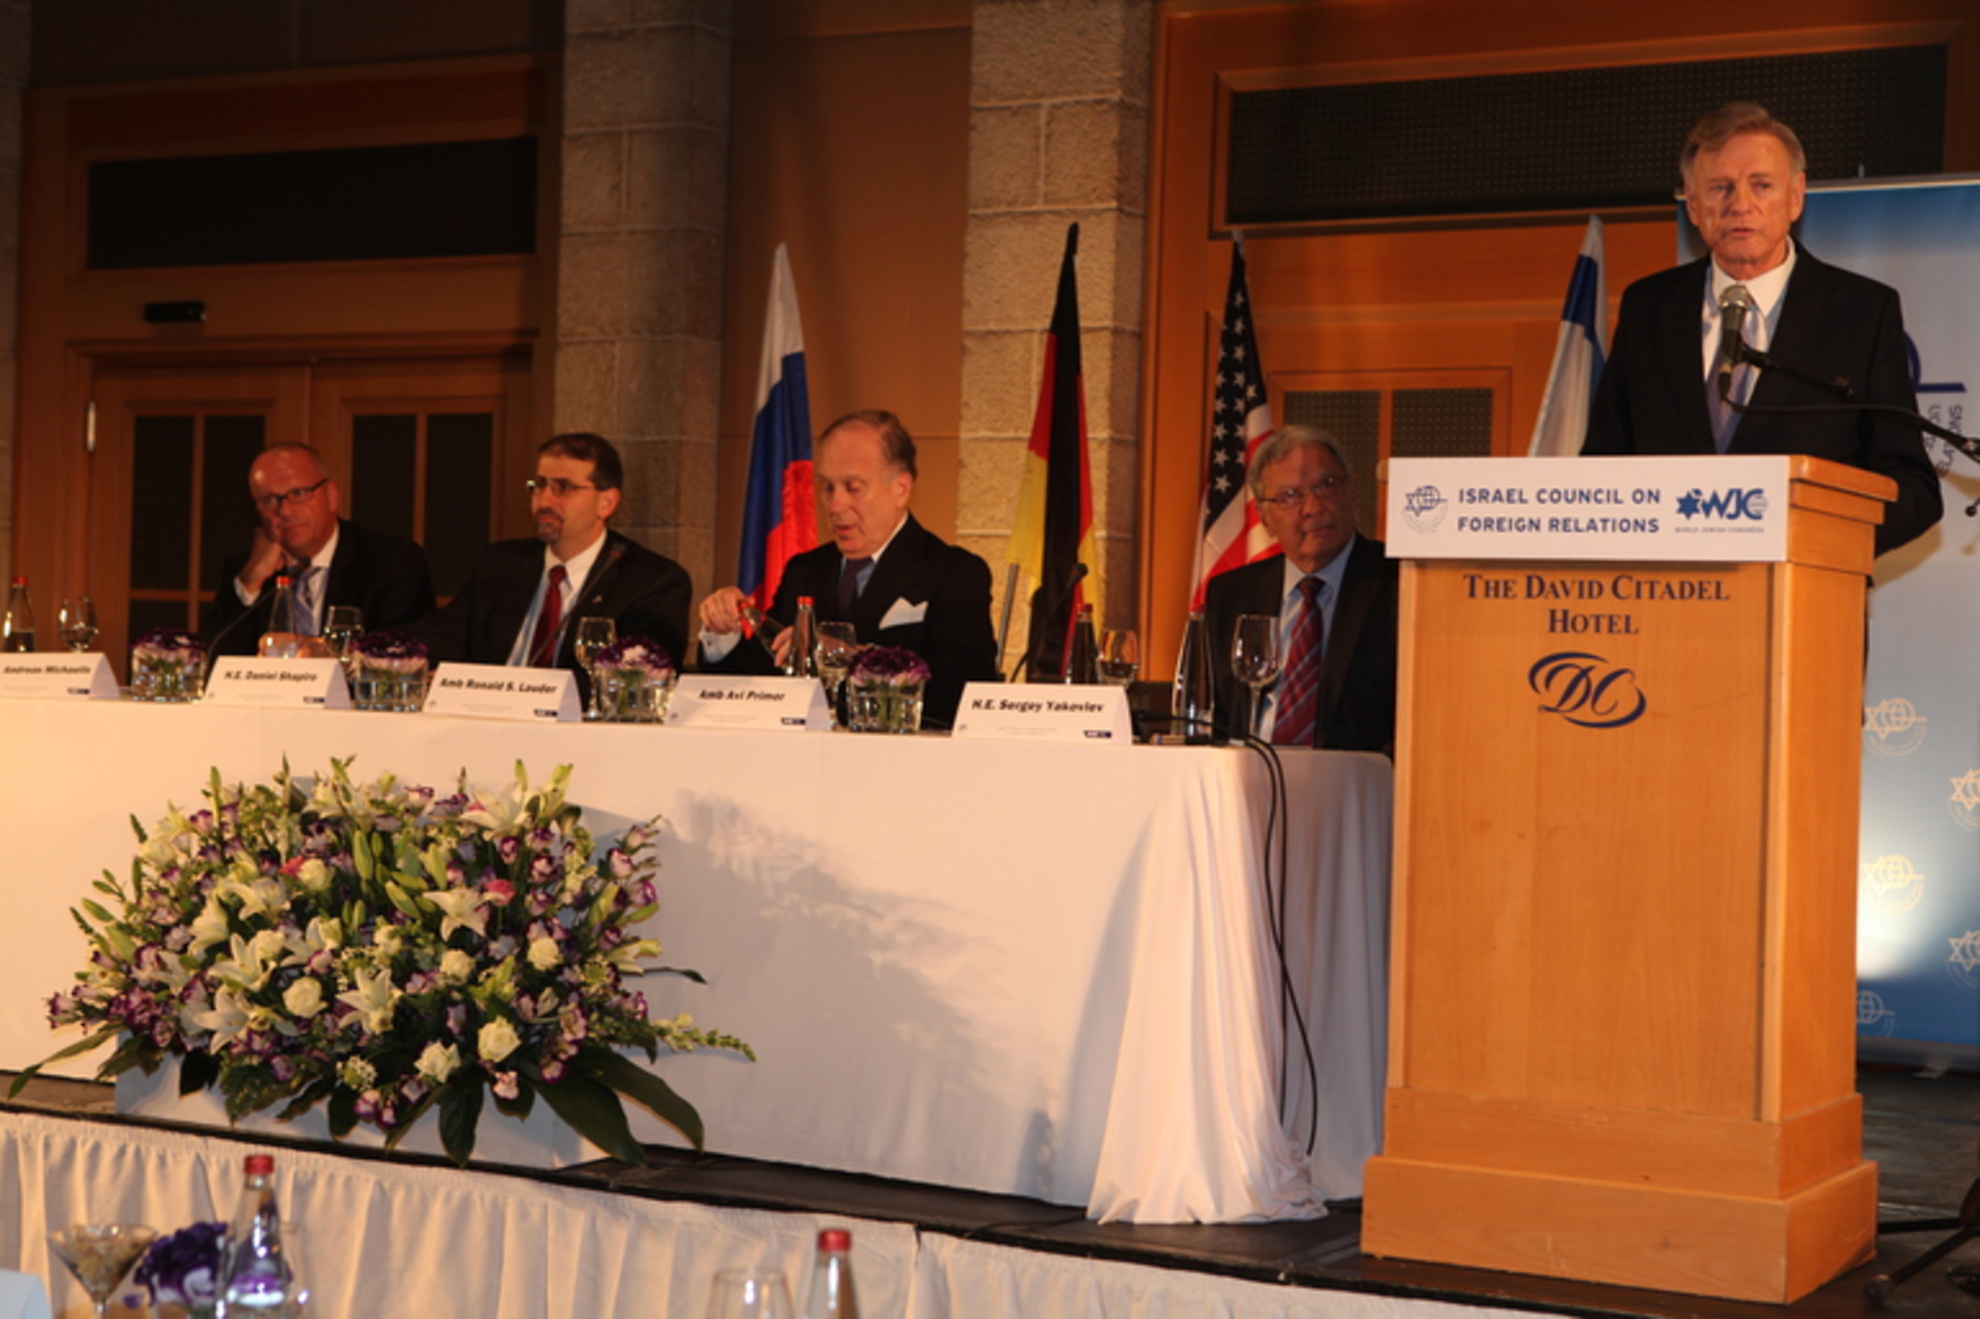 ICFR Symposium - The Middle East Vortex: Views from Washington, Moscow and Berlin